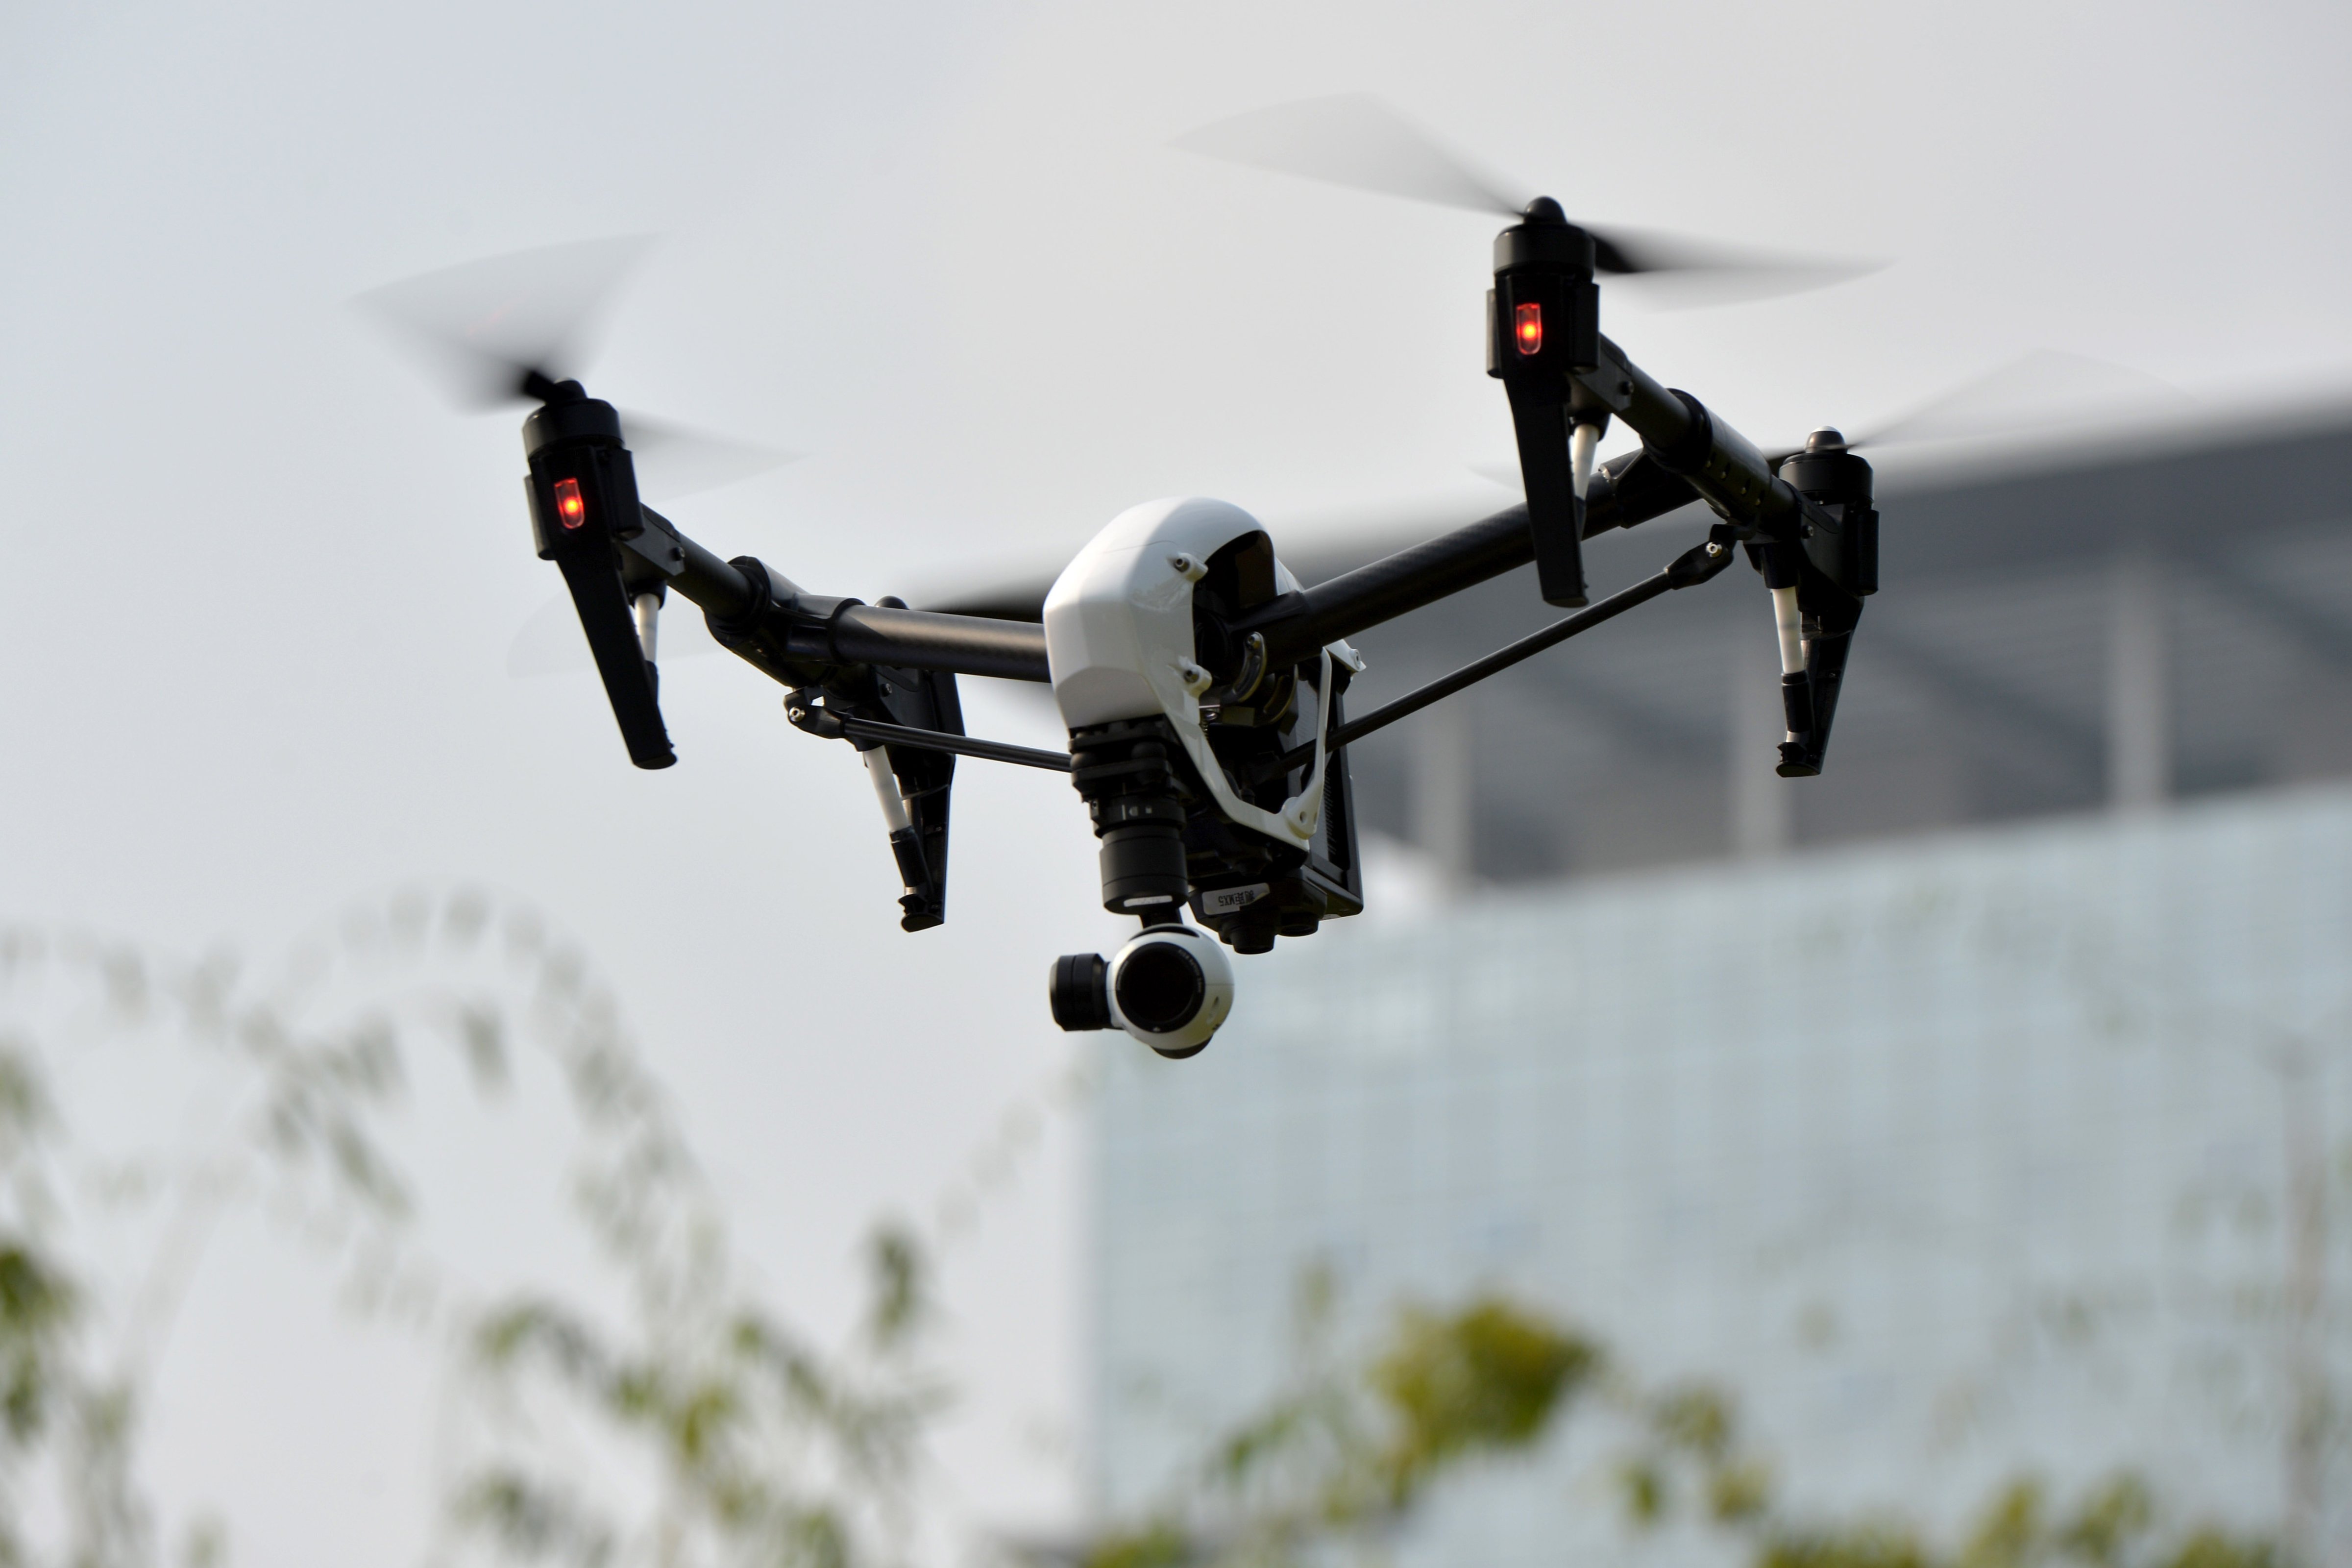 The 'Inspire 1' drone is presented outdoors on November 26, 2014 in Shenzhen, Guangdong province of China. (ChinaFotoPress/Getty Images)